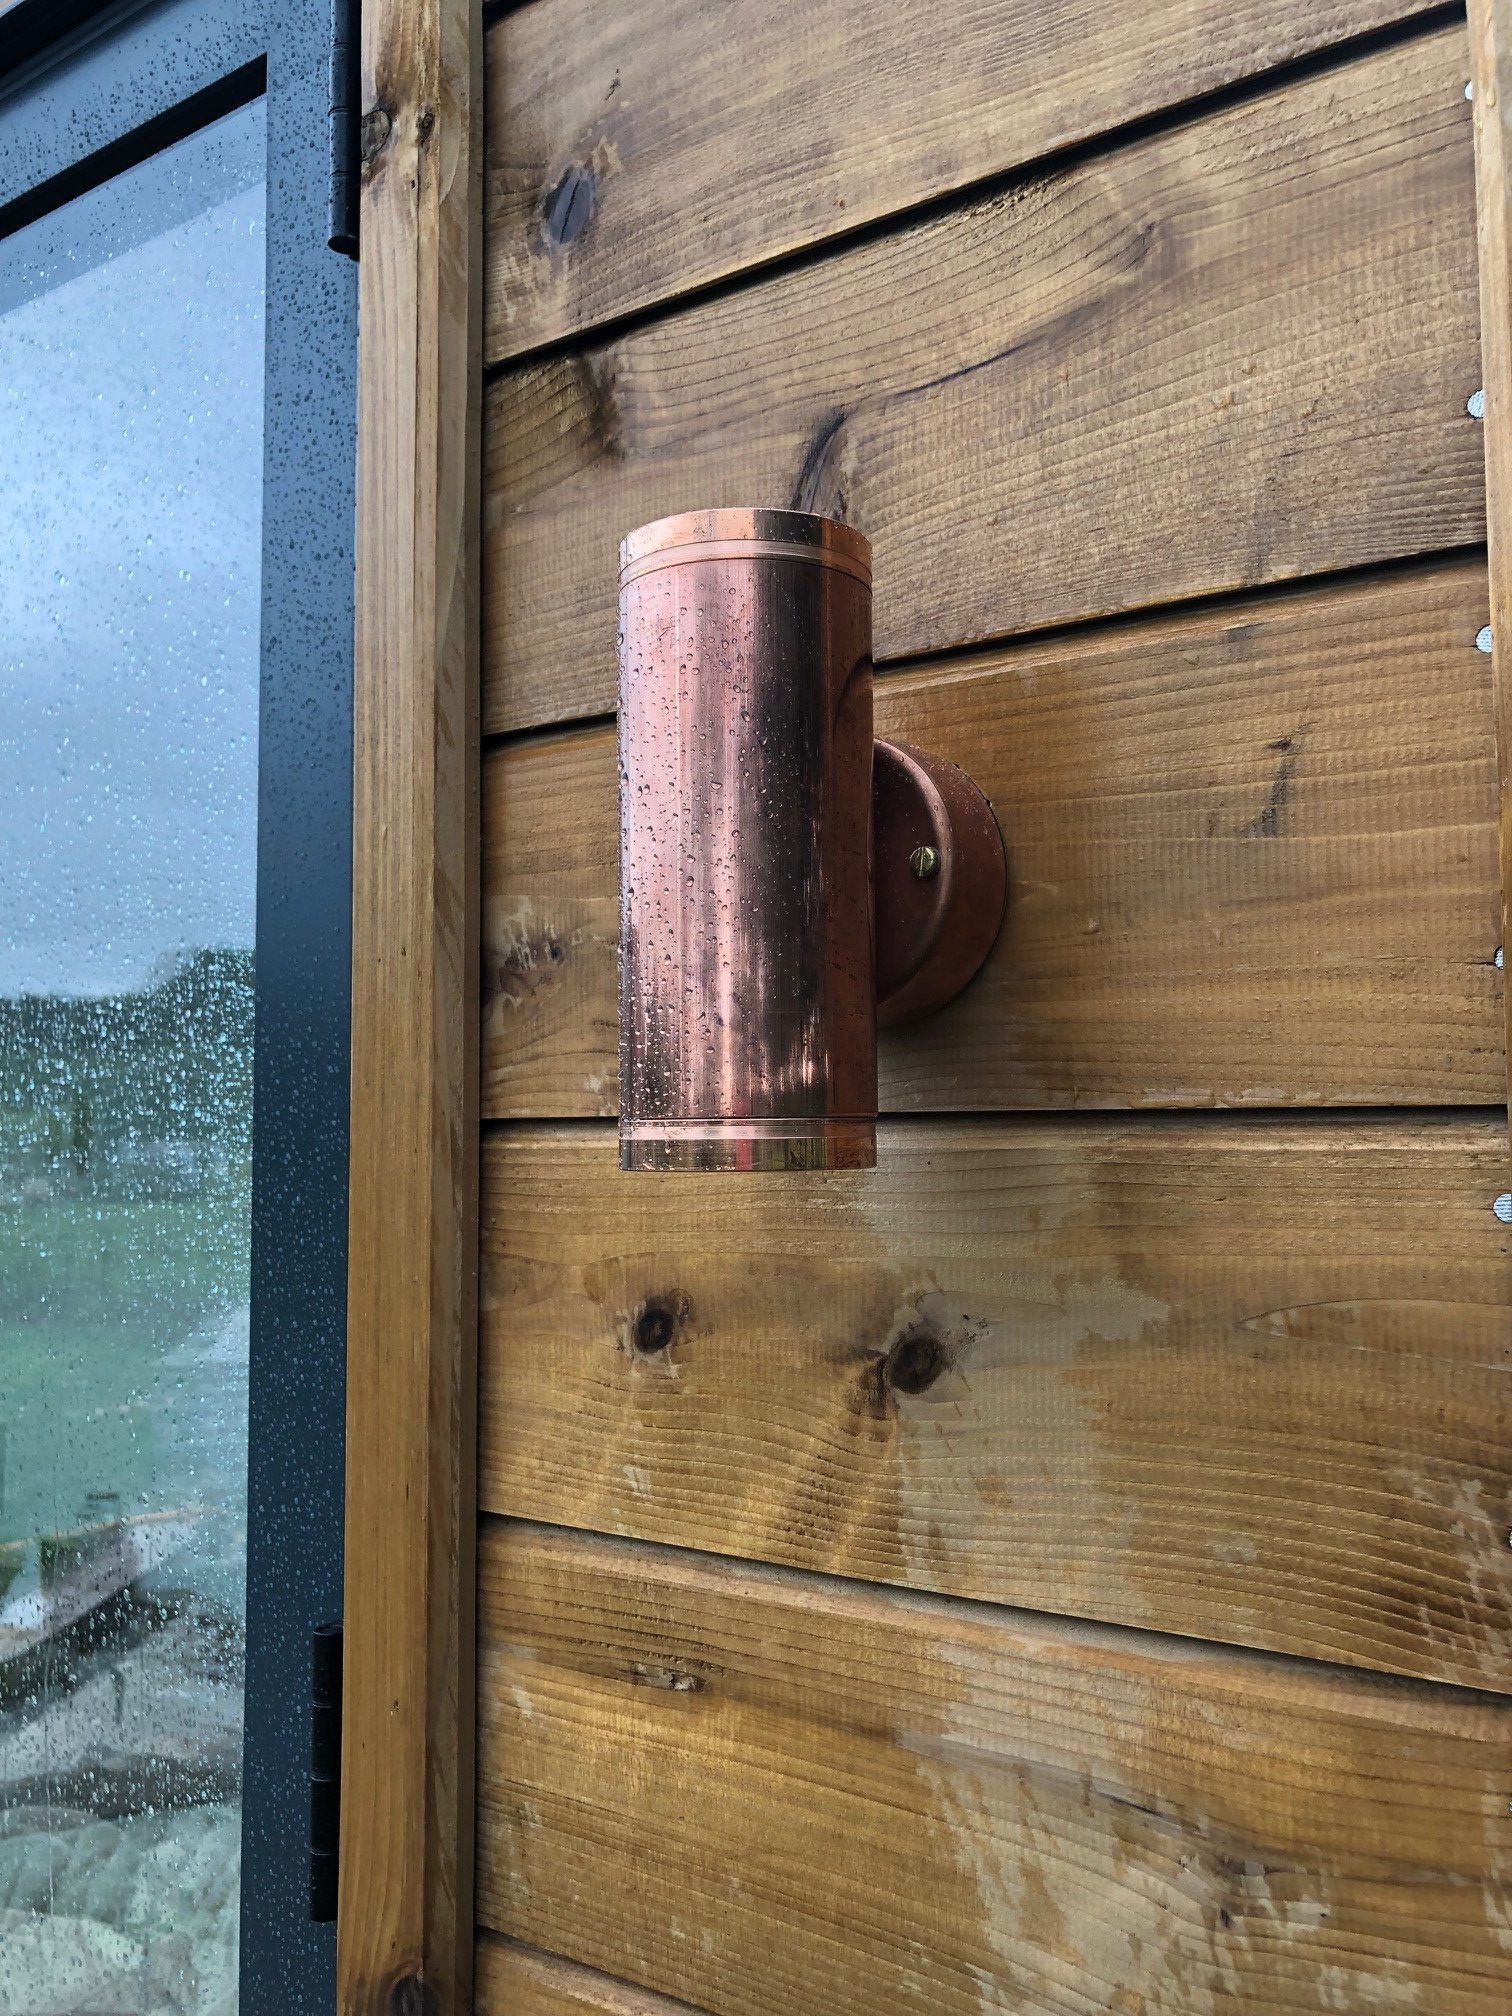 Hunza copper light installed on wooden building